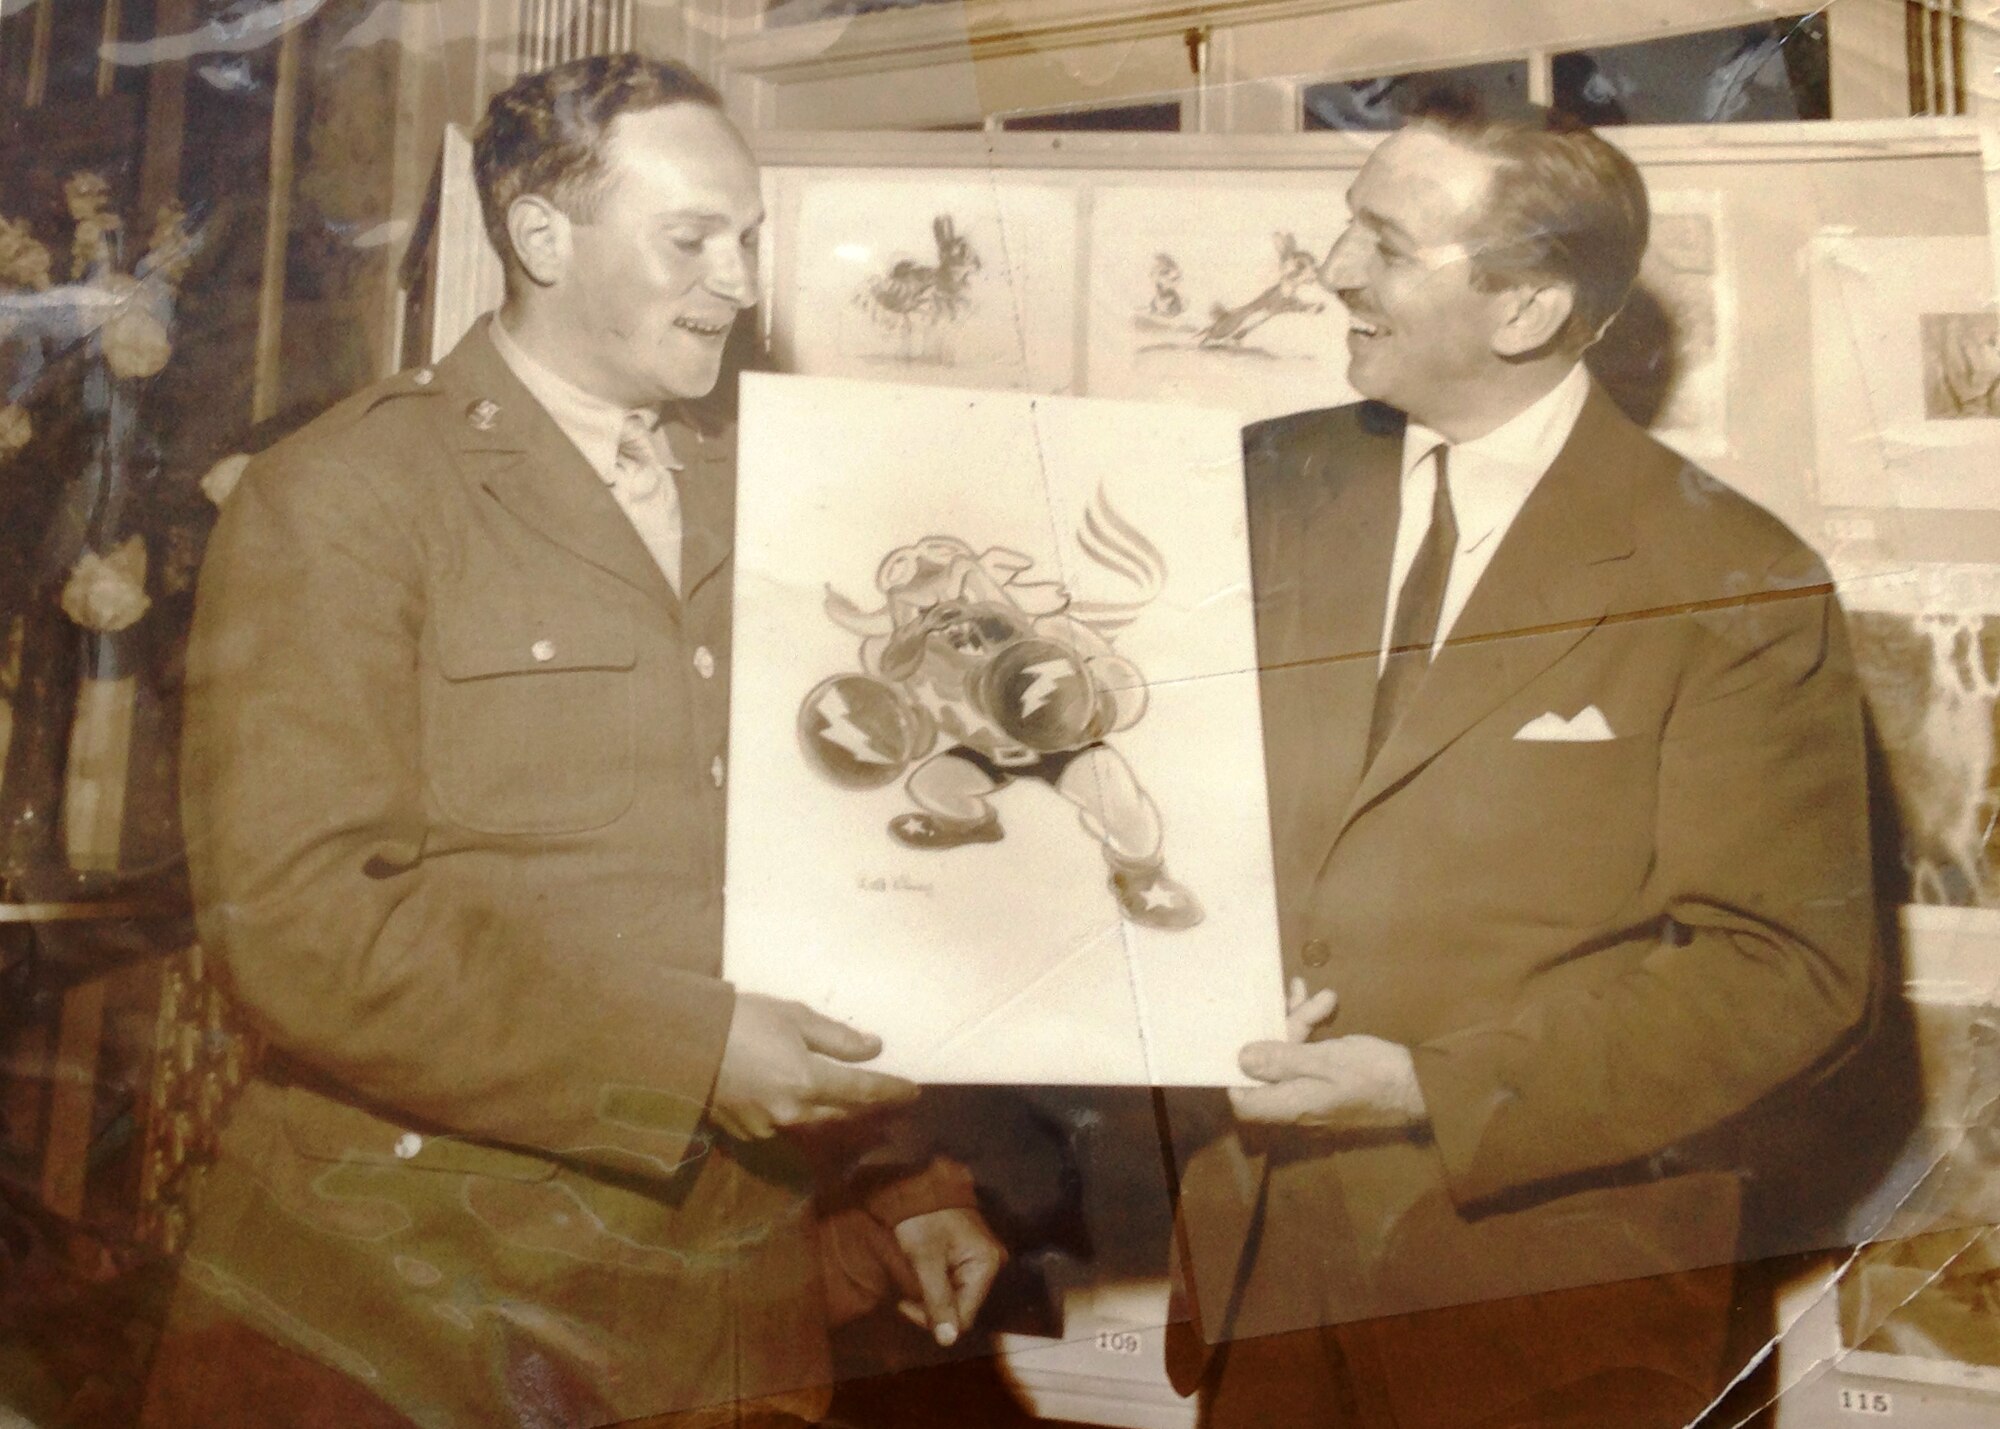 While stationed at Luke, Sgt. Seymour Pine had the unique privilege of accepting the 62nd Fighter Squadron emblem of a boxing bulldog from the artist who drew it—Walt Disney. (Courtesy photo from Richard Pine)